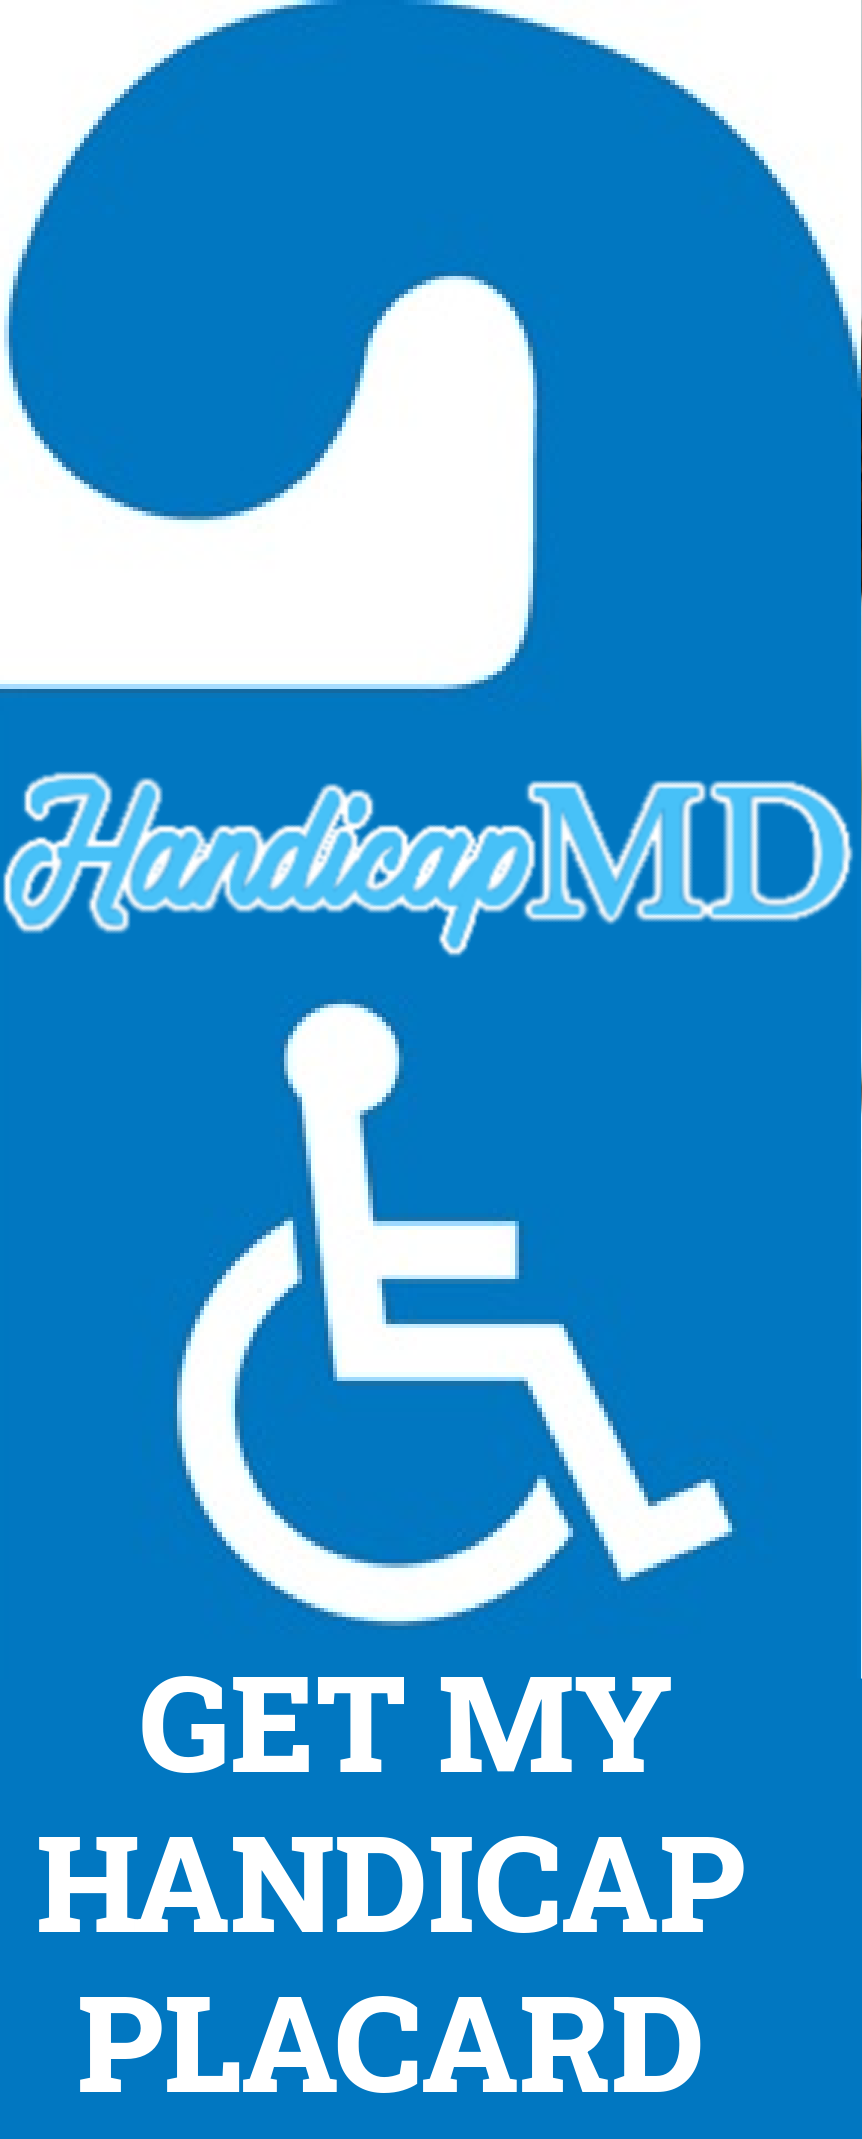 The Impact of Handicap Placard Abuse and How to Report it Ohio